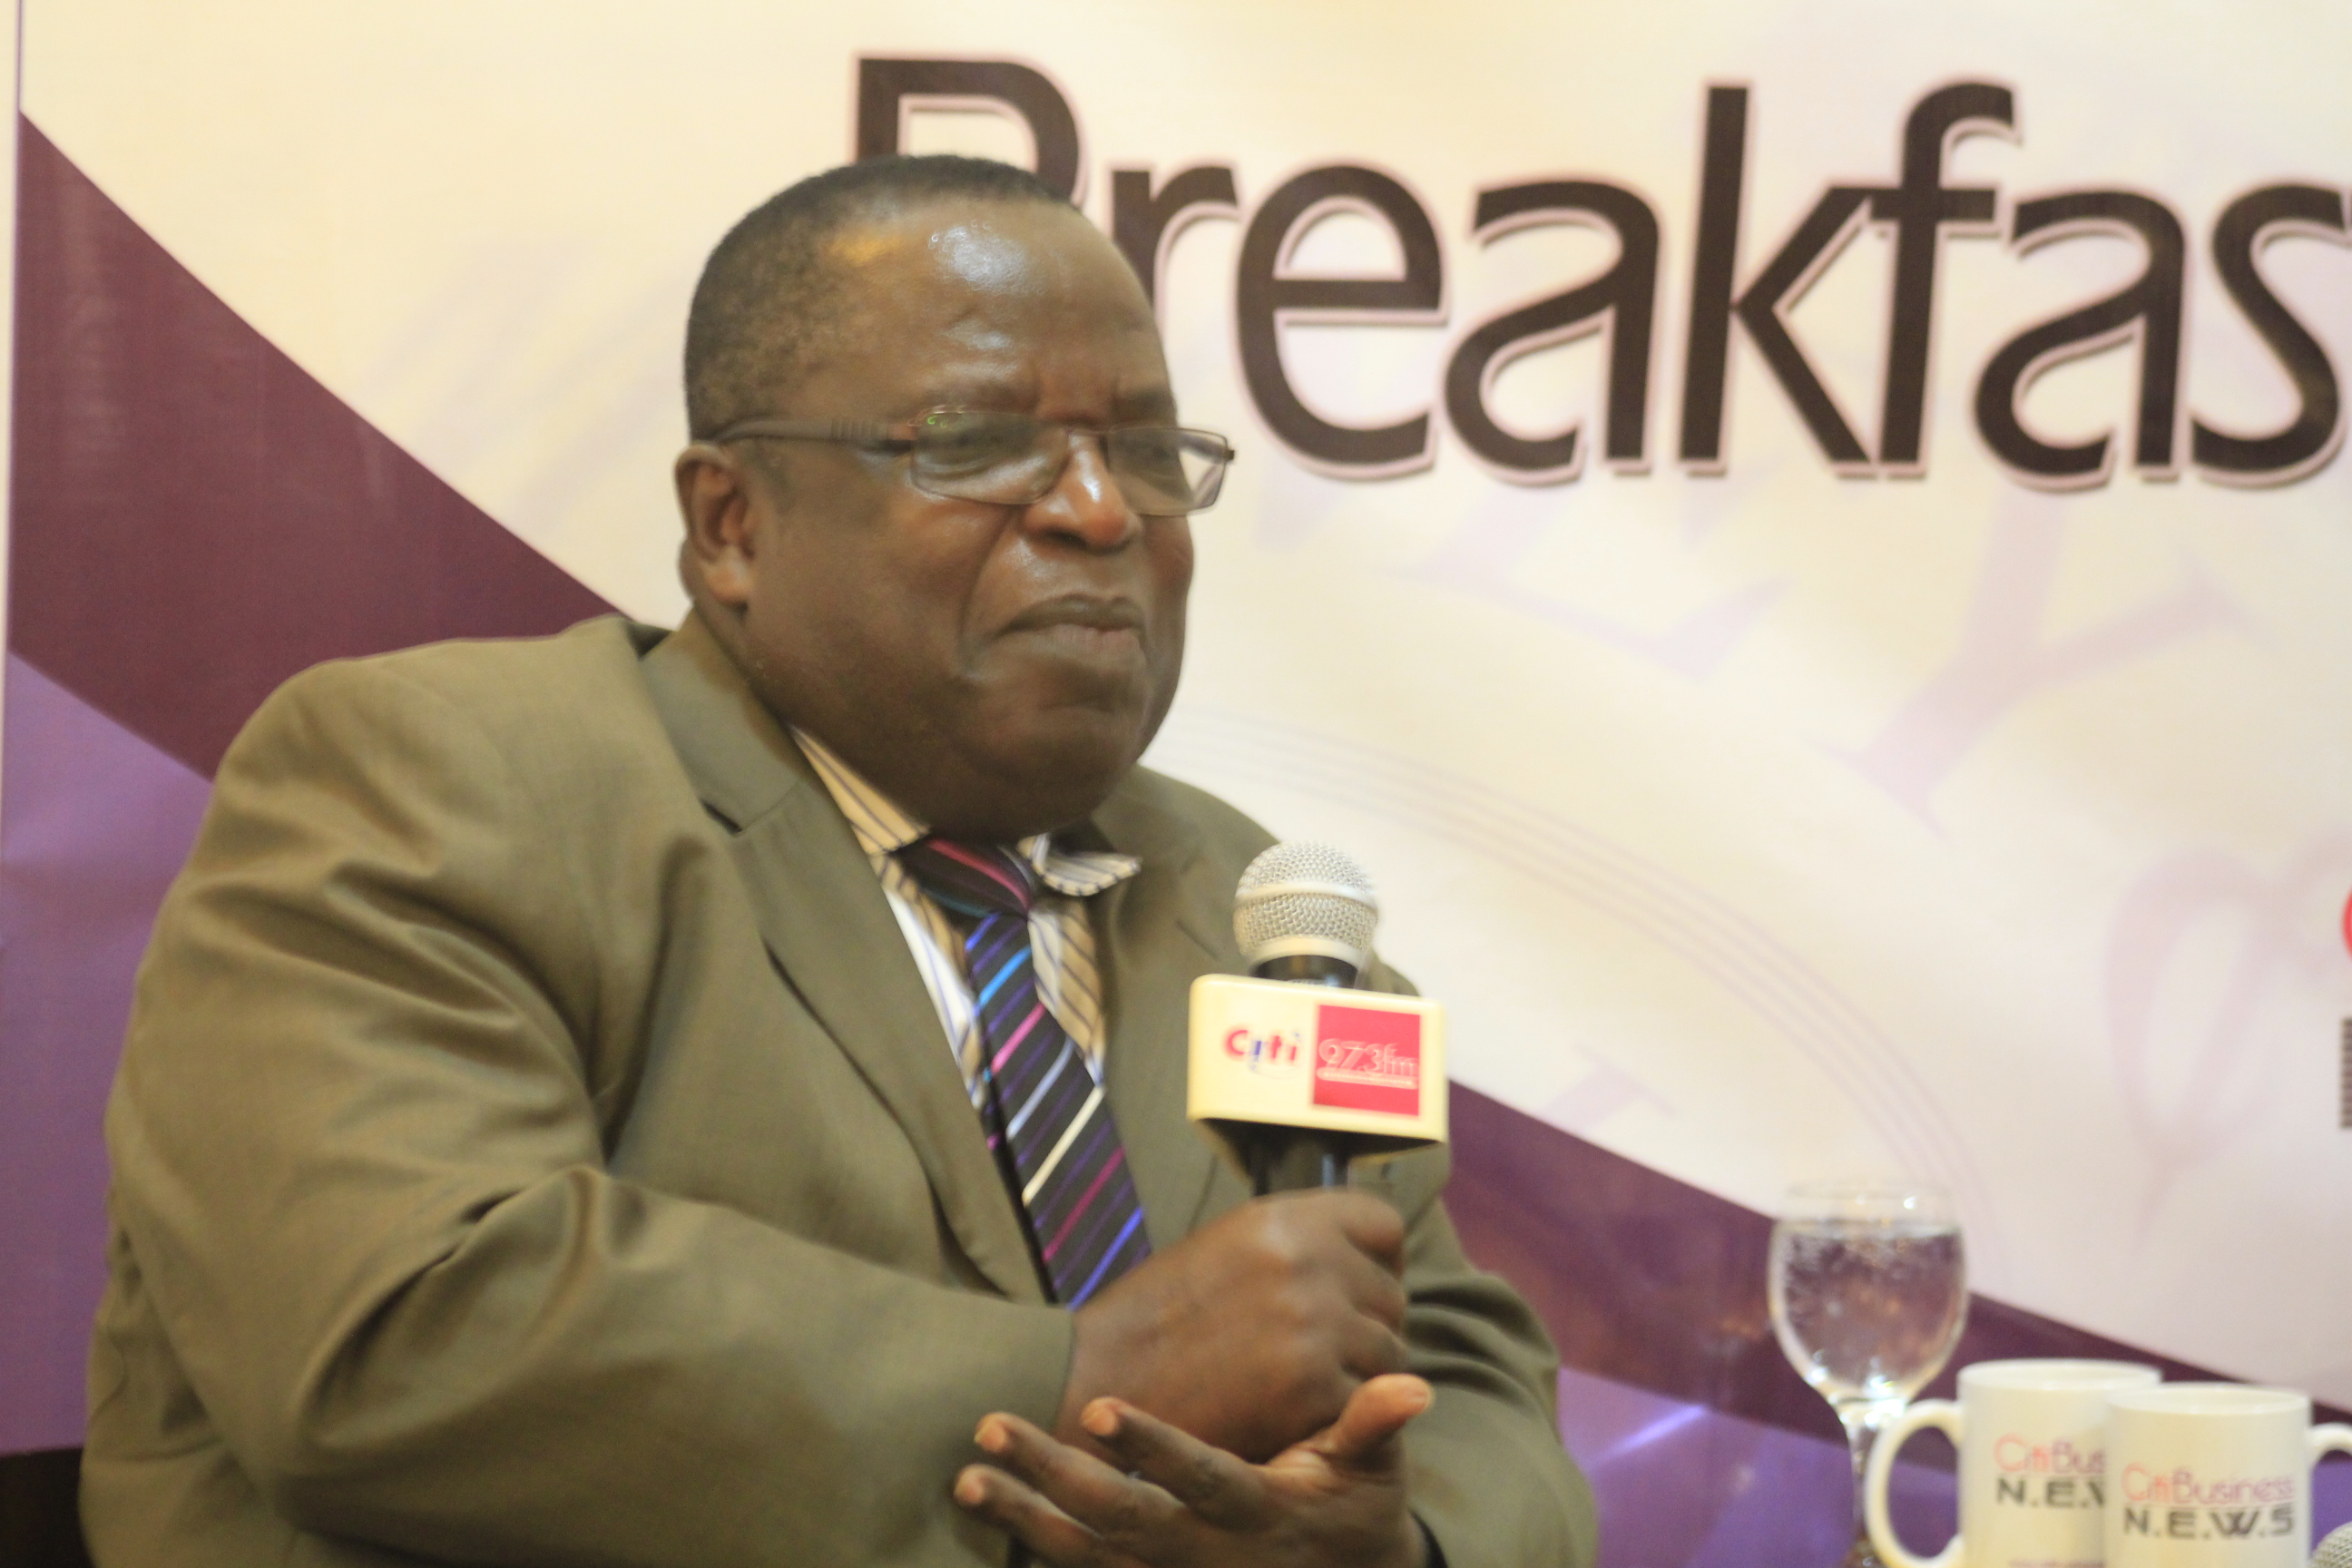 , Banking consultant and Head of the Osei Tutu II Centre for Executive Education and Research, Nana Otuo Acheampong